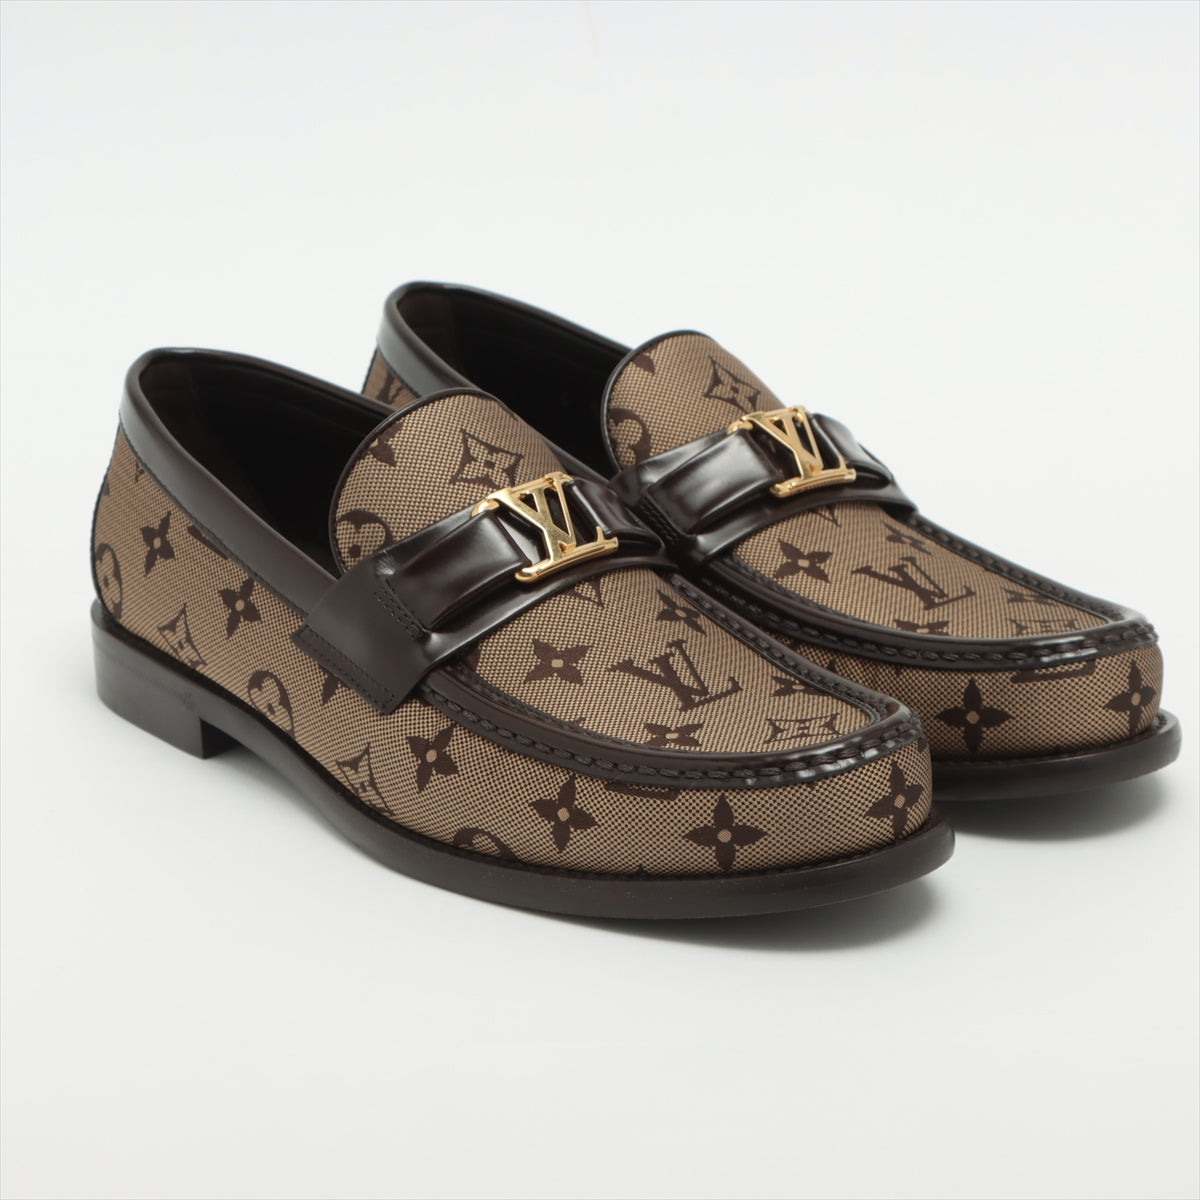 Louis Vuitton Major line 23 years Canvas & leather Loafer 6 Men's Brown FA0233 box There is a bag Monogram